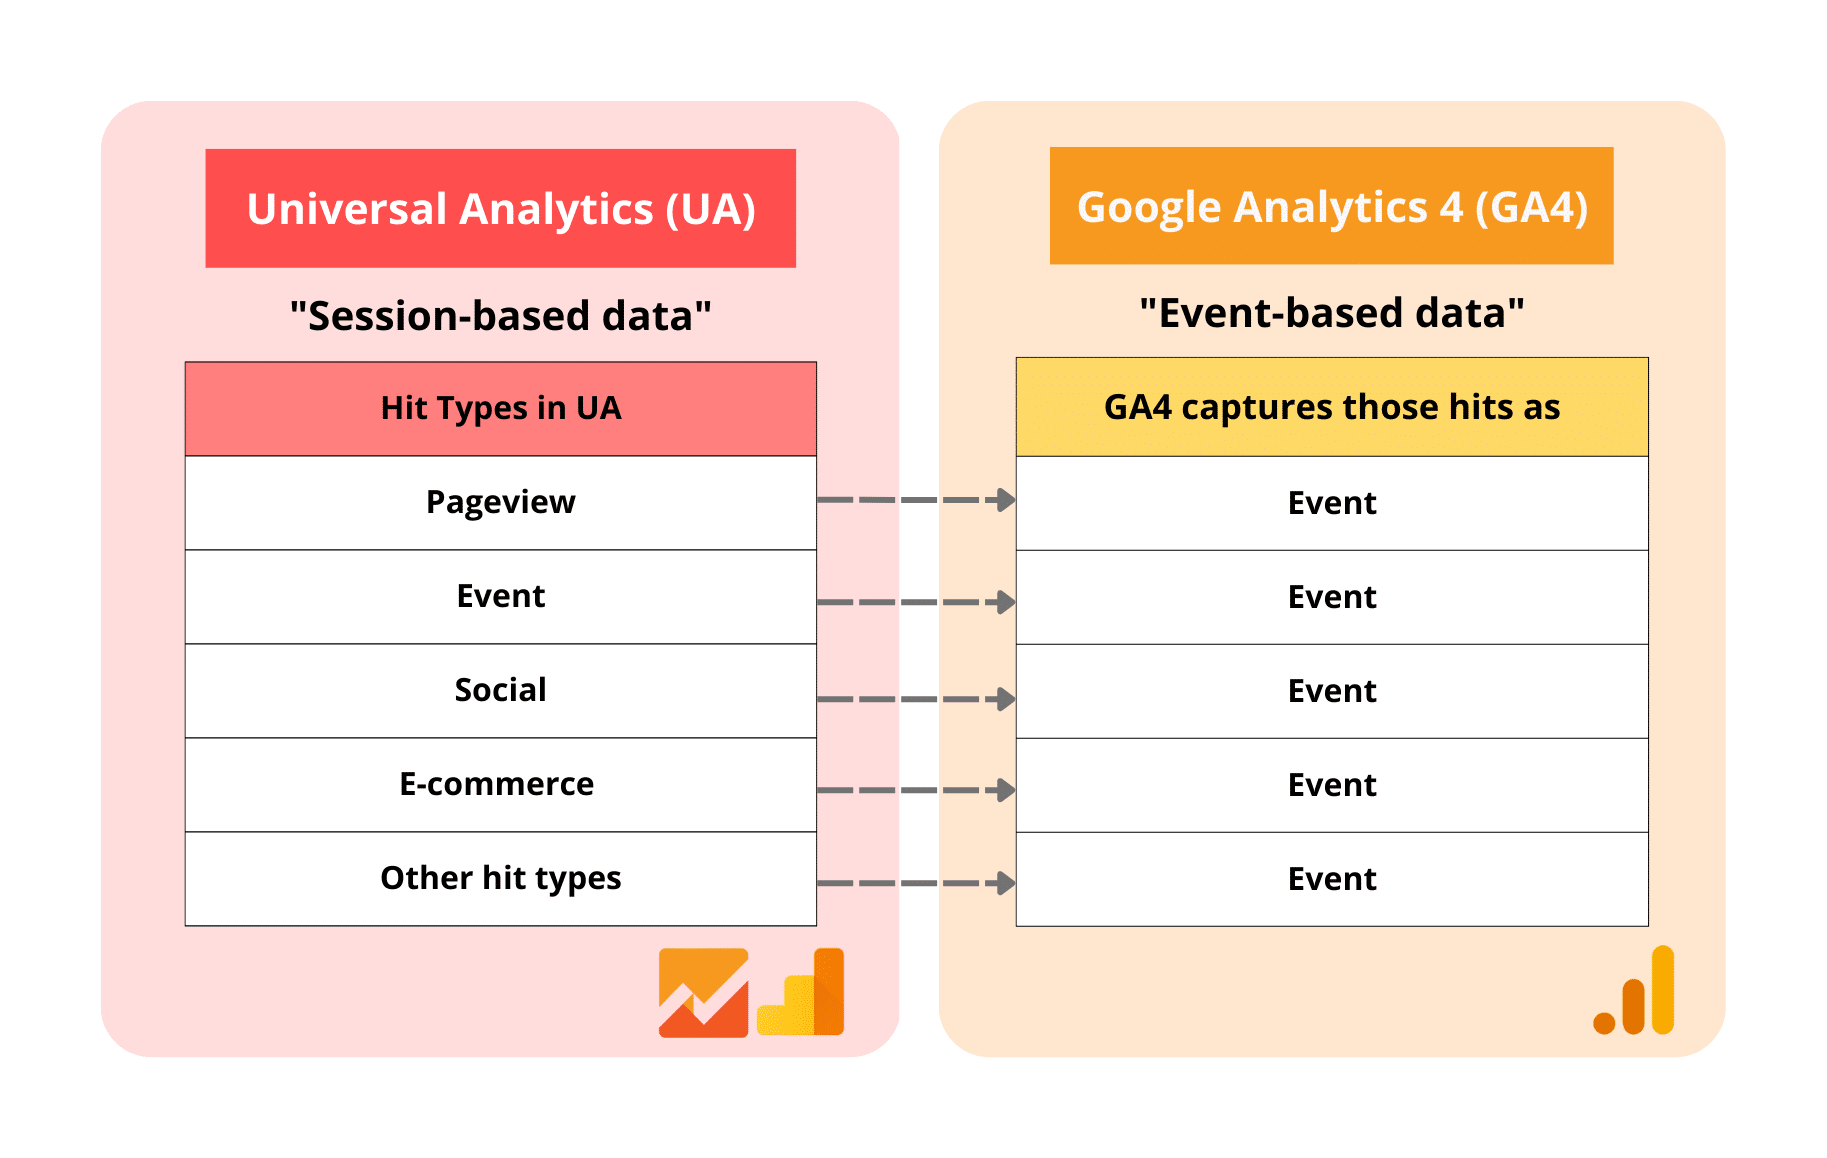 The transition of session-based data to event-based data from Universal Analytics to Google Analytics 4.